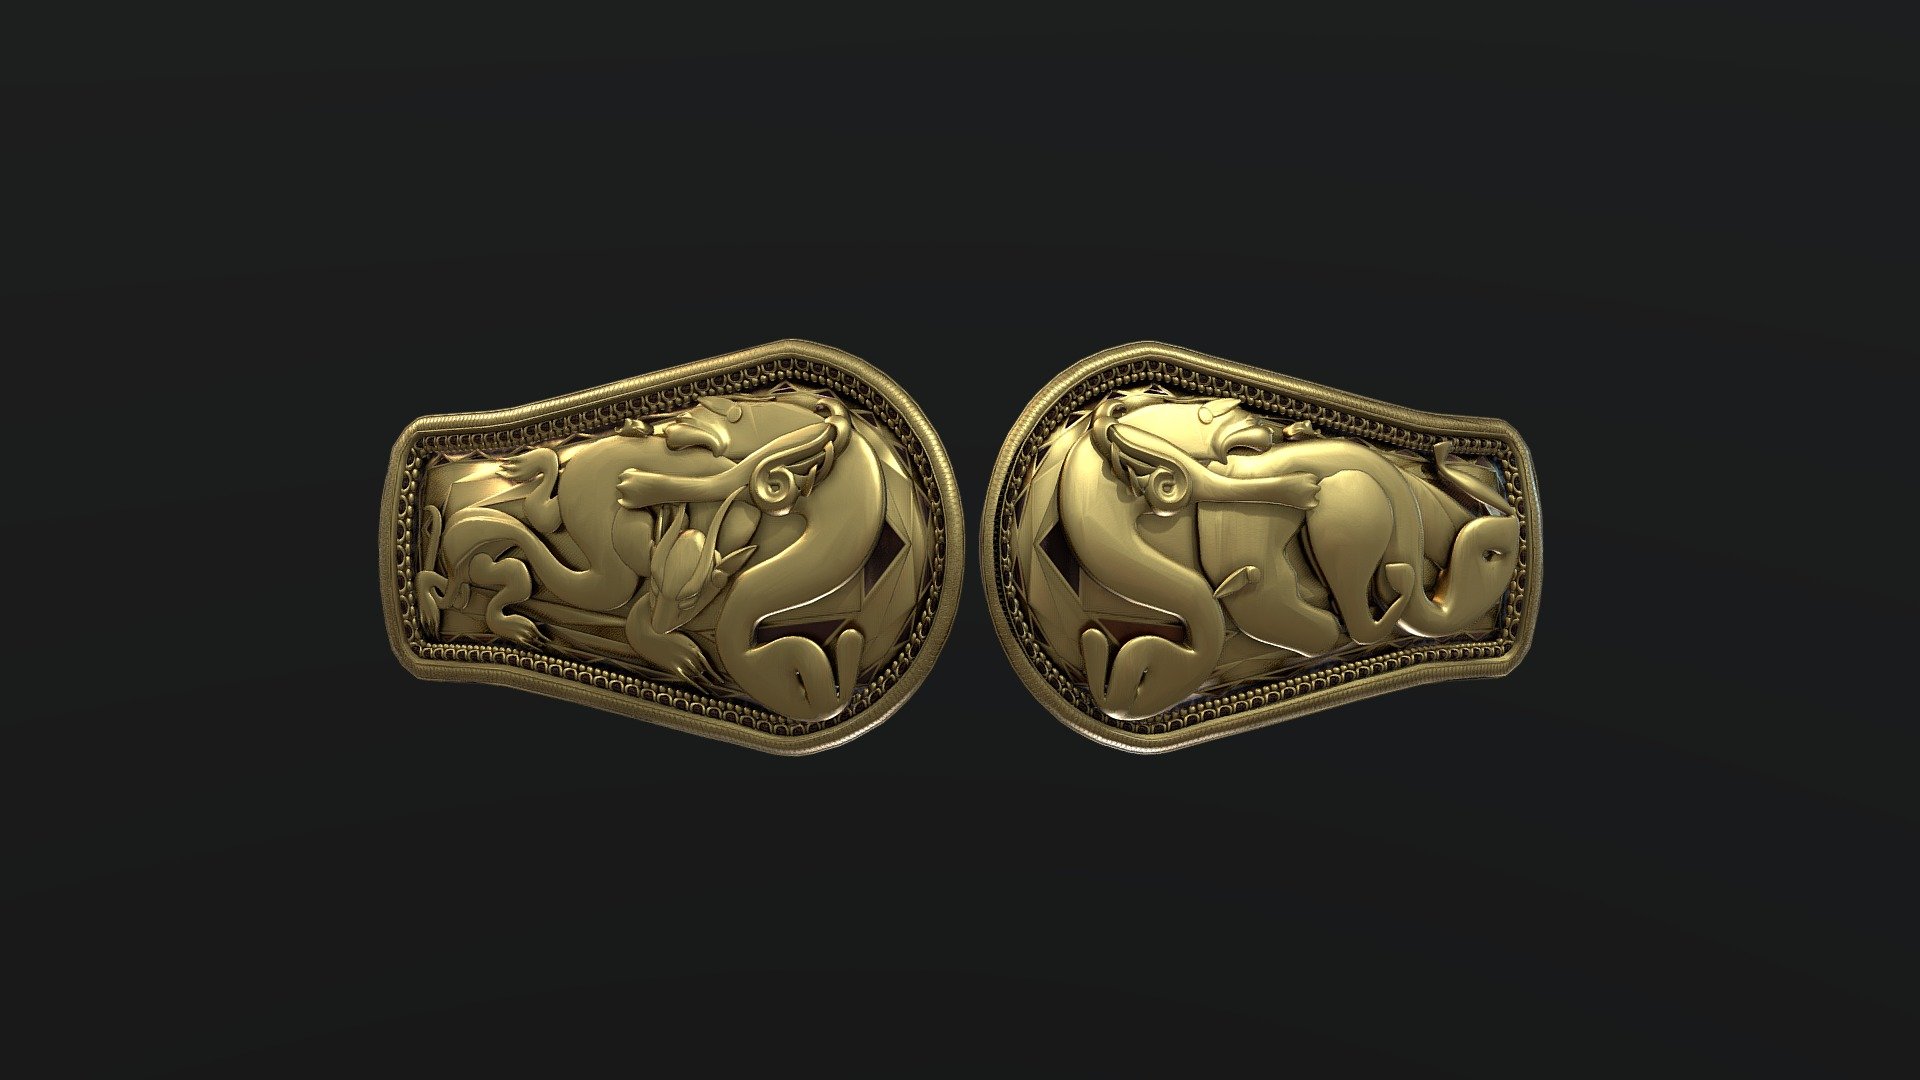 Xiongnu-inspired Hunnic belt buckles for my project: The Legend of Oghuz Khan.

The wolves on each buckle are shaped like clouds, symbolizing Oghuz's sovereignty over the earth. In Hunnic and Turkic culture, the left or East is considered the superior cardinal direction; hence, a prince associated with the East would often be designated as heir to the khanate. As such, the horse, symbolizing the nomad, is placed on the East in contrast to the dragon that represents the Han, or non-bow wielding peoples. Nonetheless, both the horse and the dragon are shown to be powerless against the wolves that represent Hunnic superiority. 

Stylistically, the buckles emulate the classic look of Xiongnu and Hunnic jewelry: gold, granulated, with carnelians/agate stones, and cloud and predatory based motiffs.

The belt is still a work in progress.

The symbolic descriptions are not meant to be offensive. They reflect the ideologies of the distant past and are thus not meant to be viewed from a modern perspective - The Legend of Oghuz Khan - Baatar's Belt Buckle - 3D model by BilgeBitig 3d model